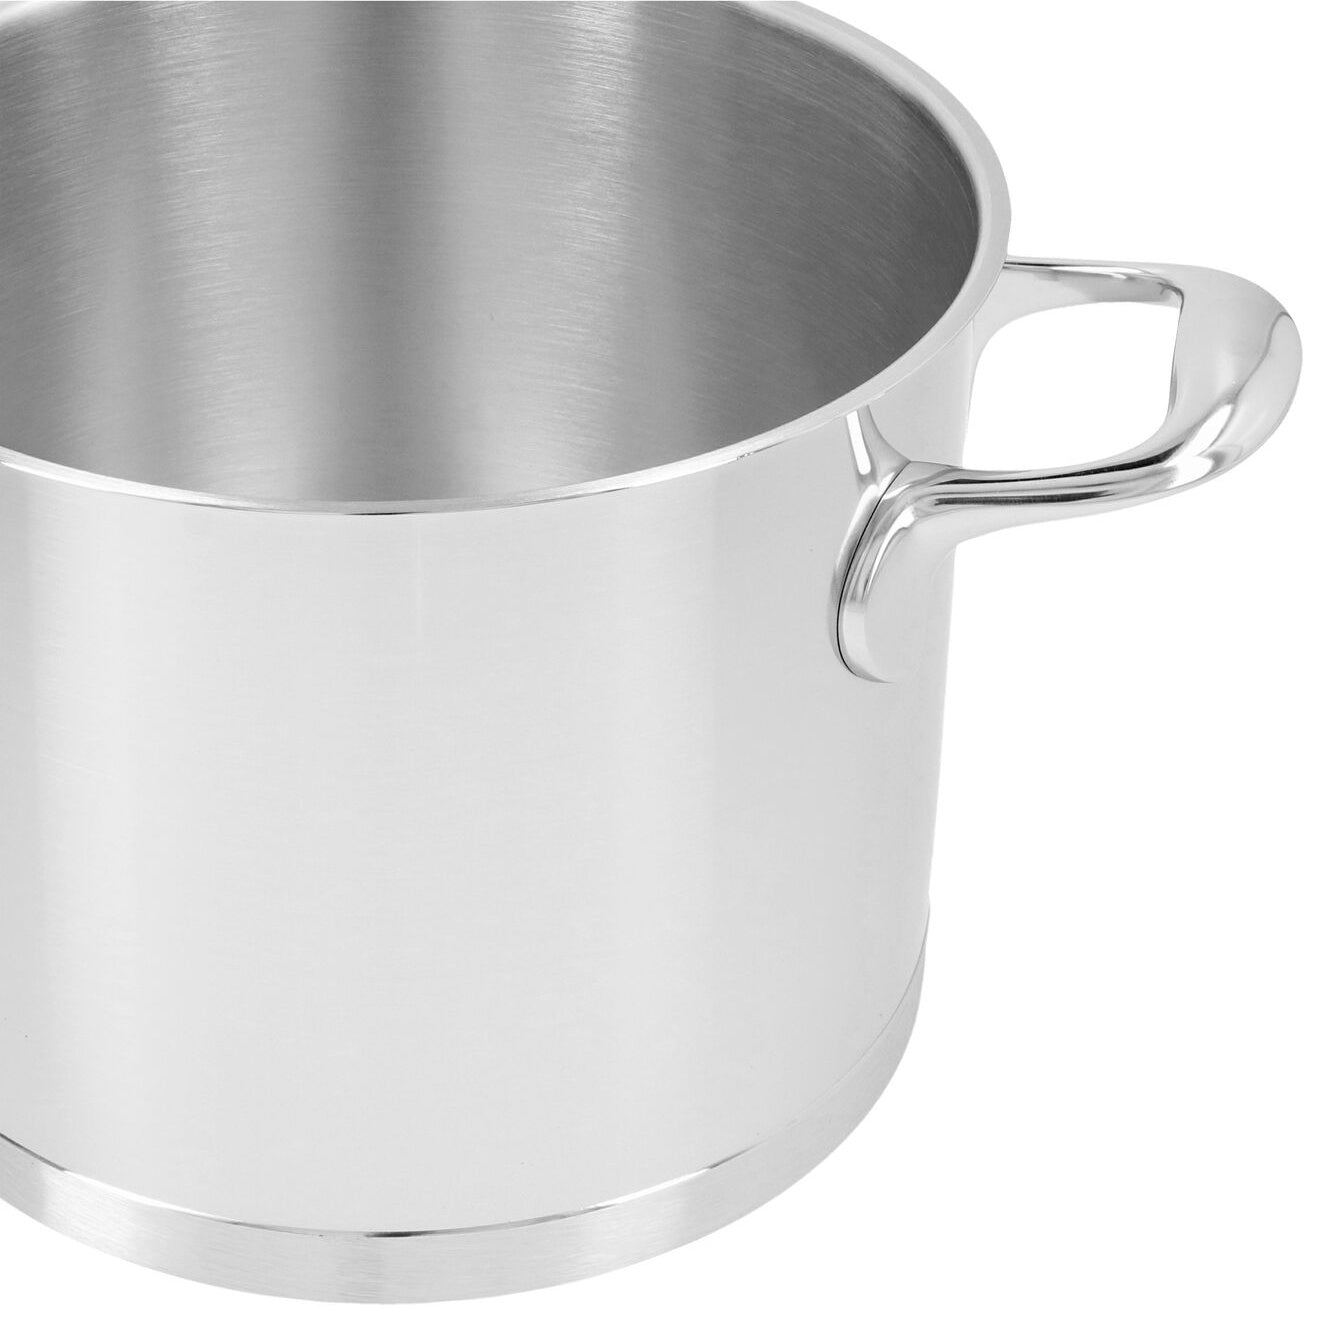 Demeyere Atlantis 7 Collection 5L 18/10 Stainless Steel Stock Pot Side